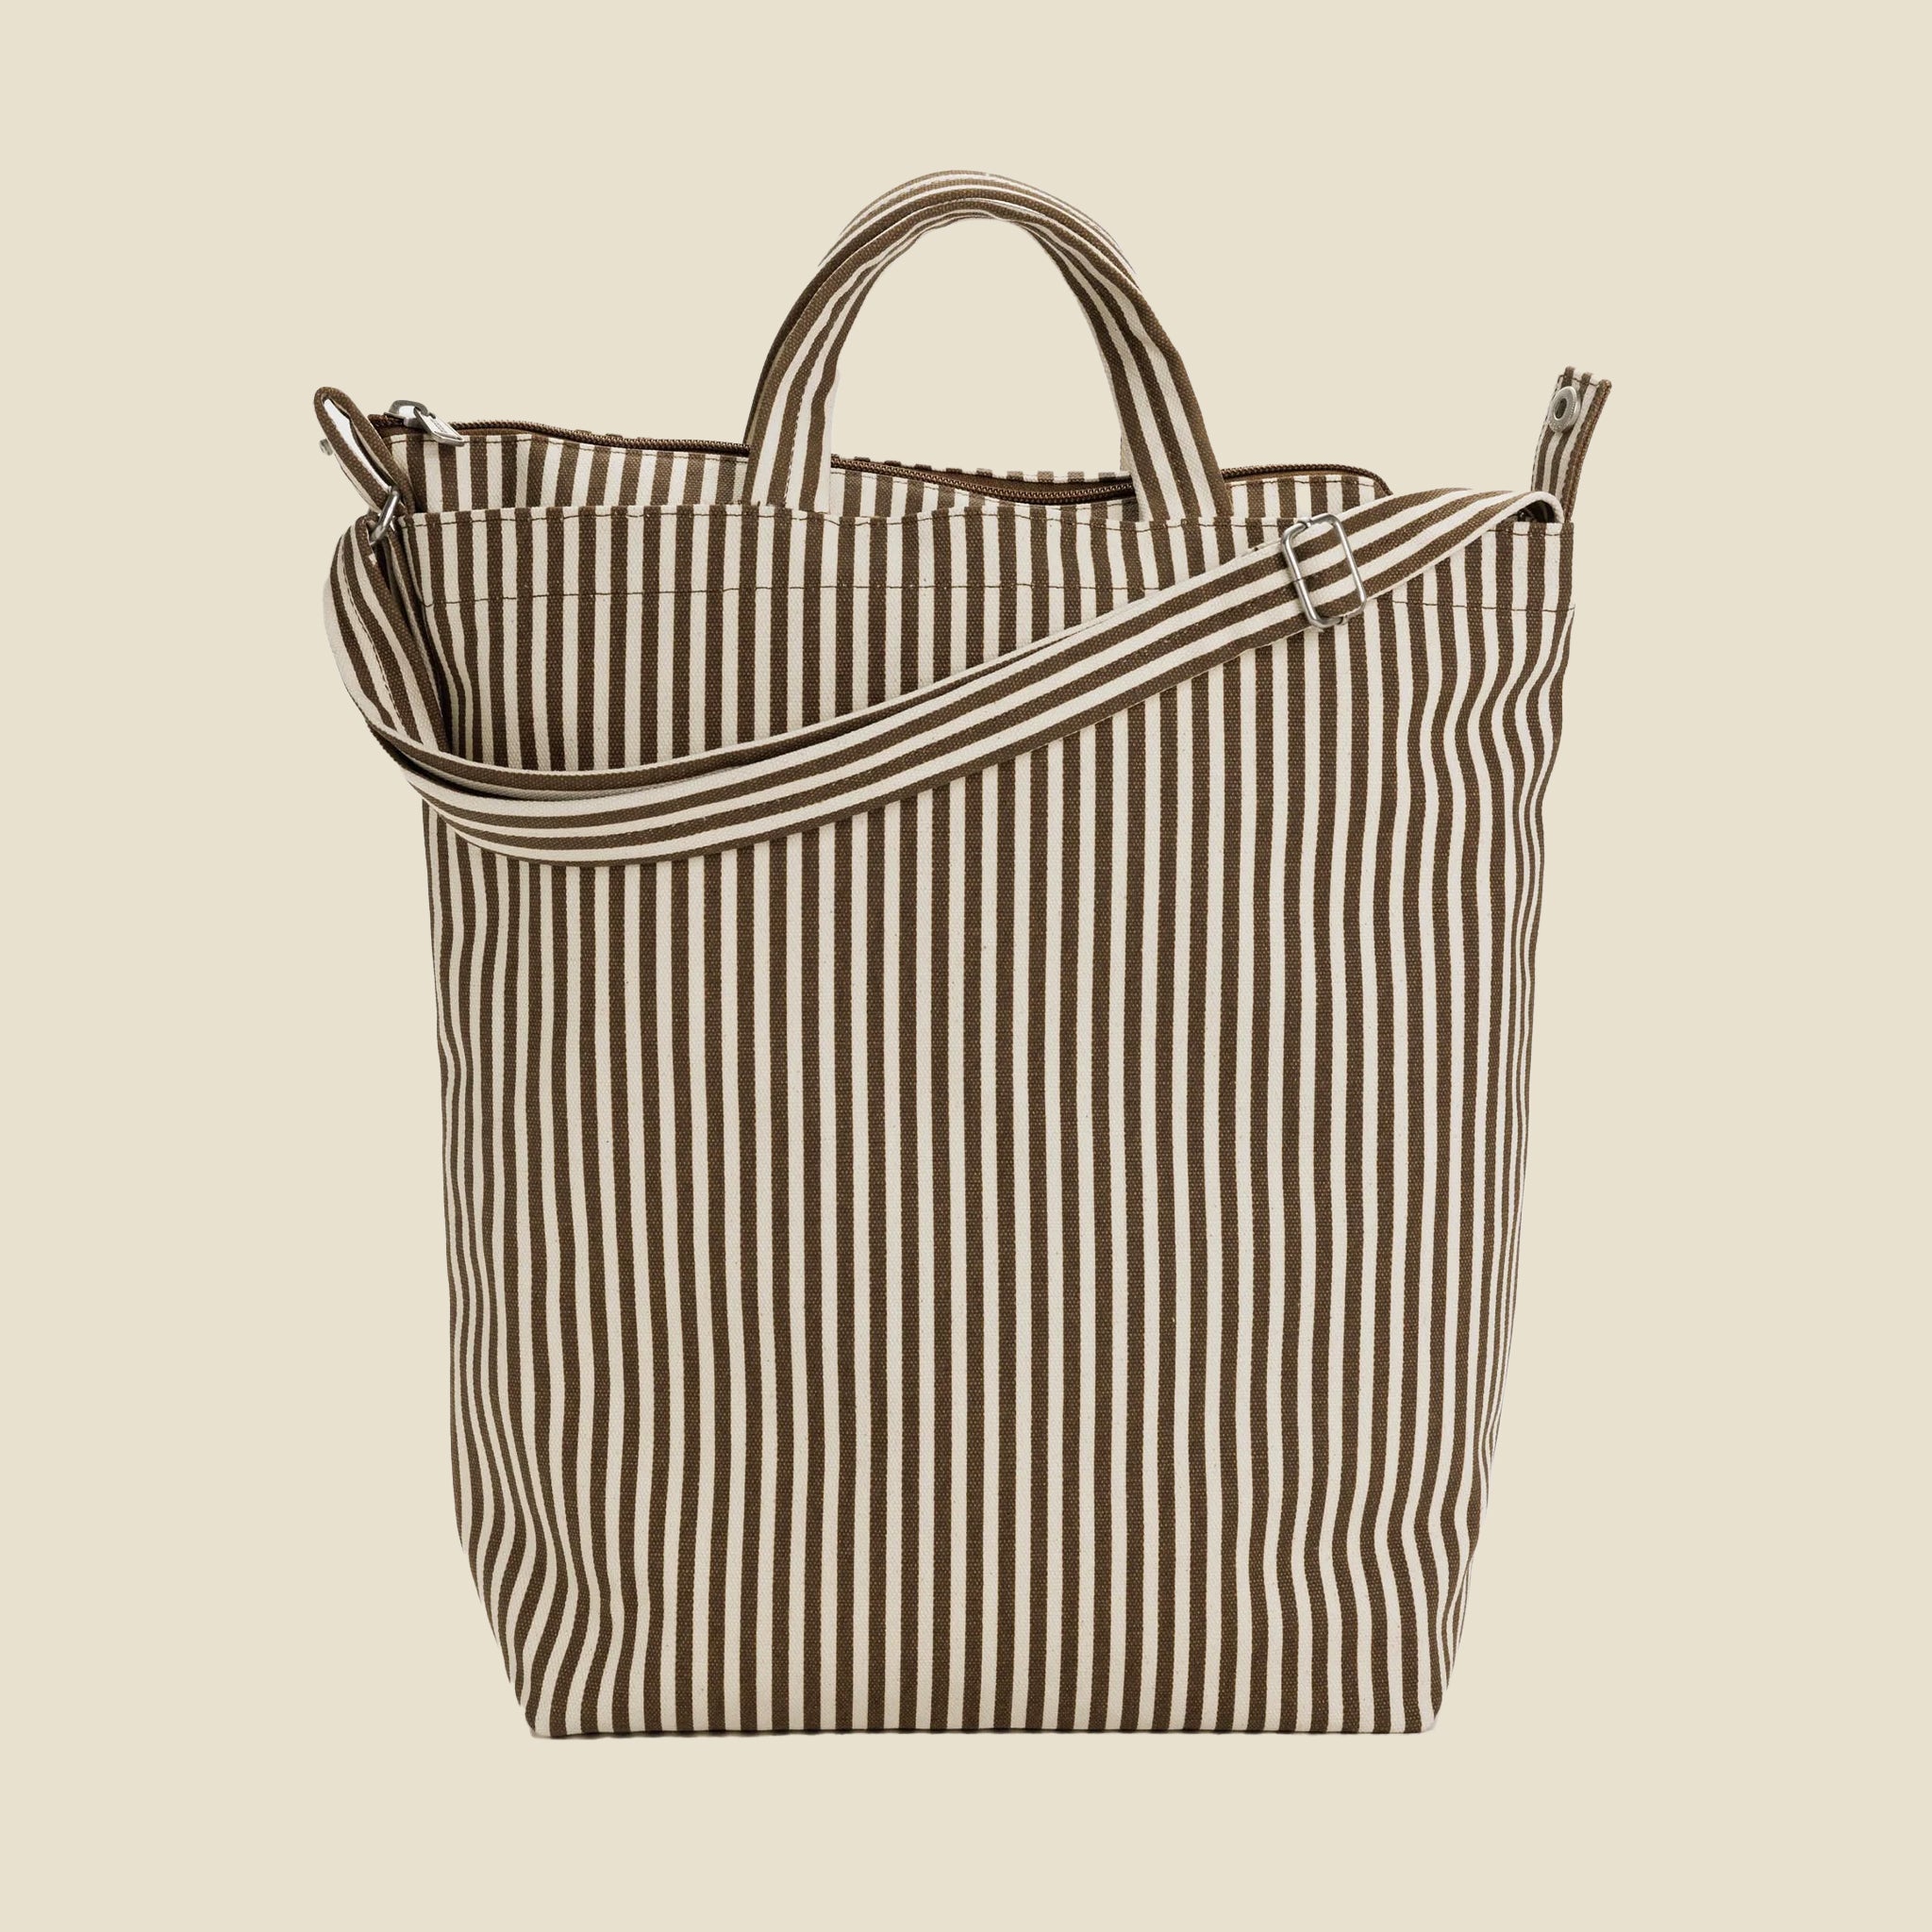 On a tan background is a brown and white stripe canvas tote bag with s hand bag and shoulder strap. 